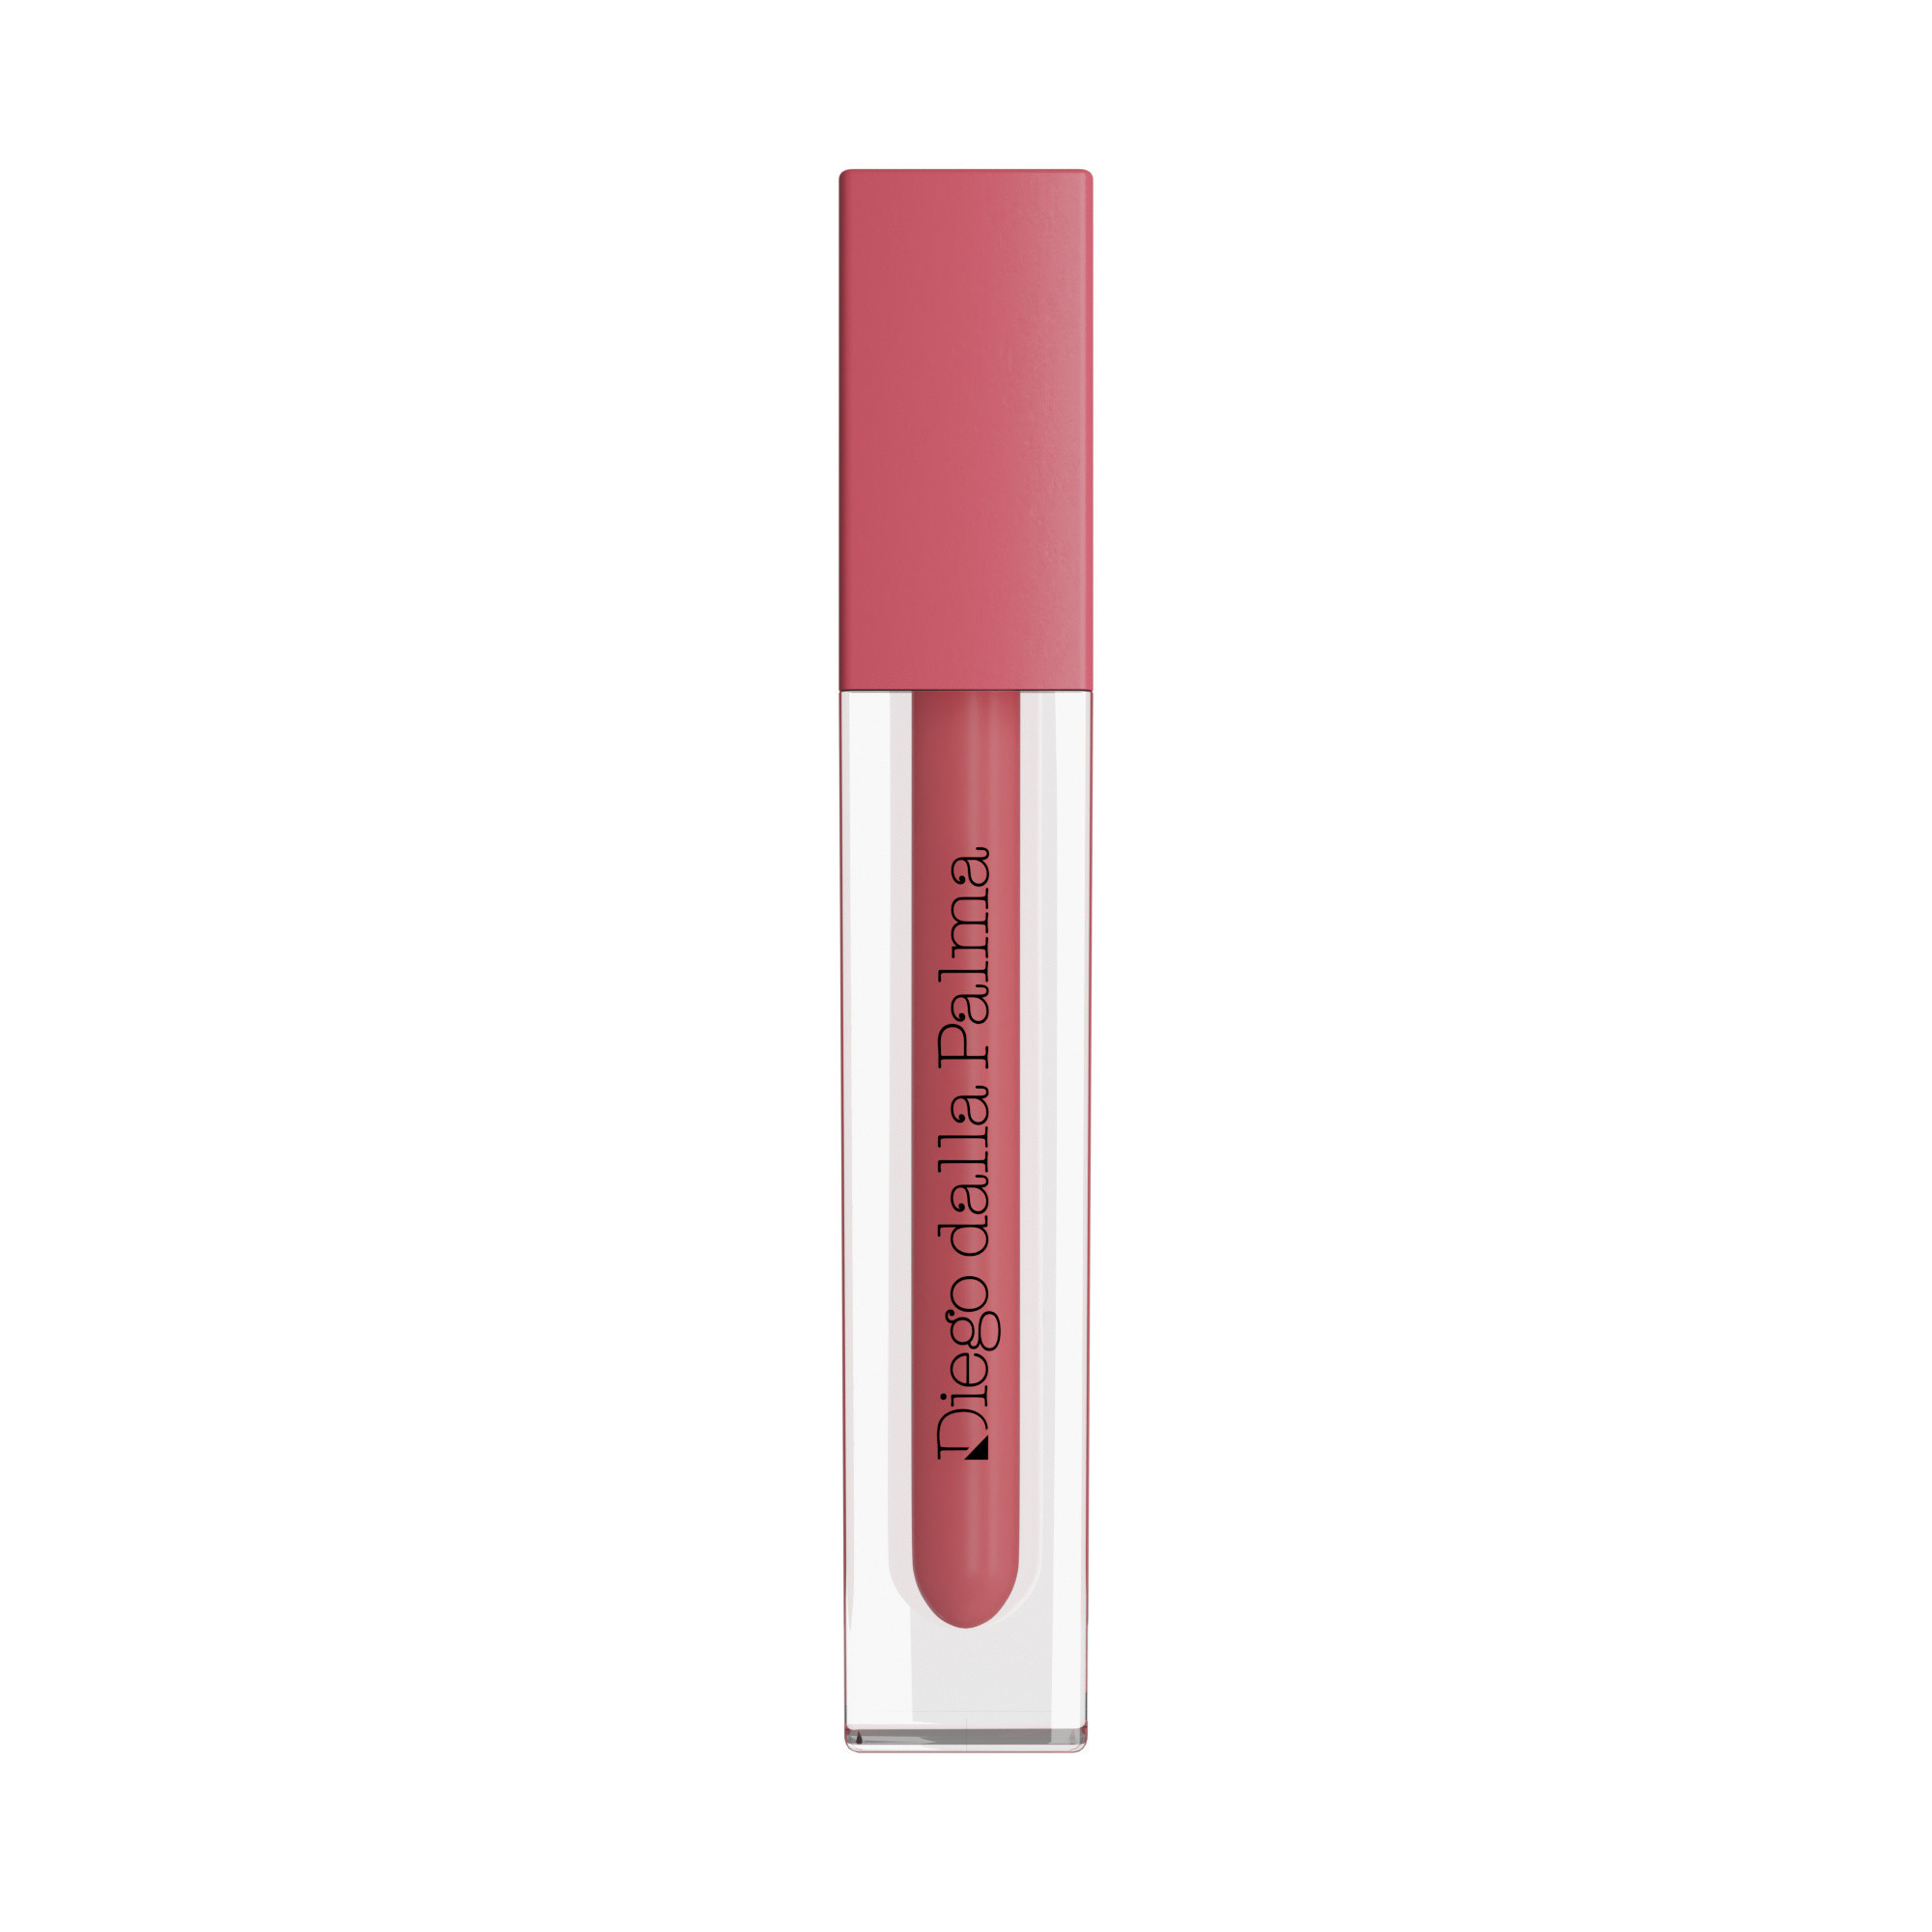 STAY ON ME - Long-Lasting Liquid Lipstick - 42 Rosa, Pink, large image number 0